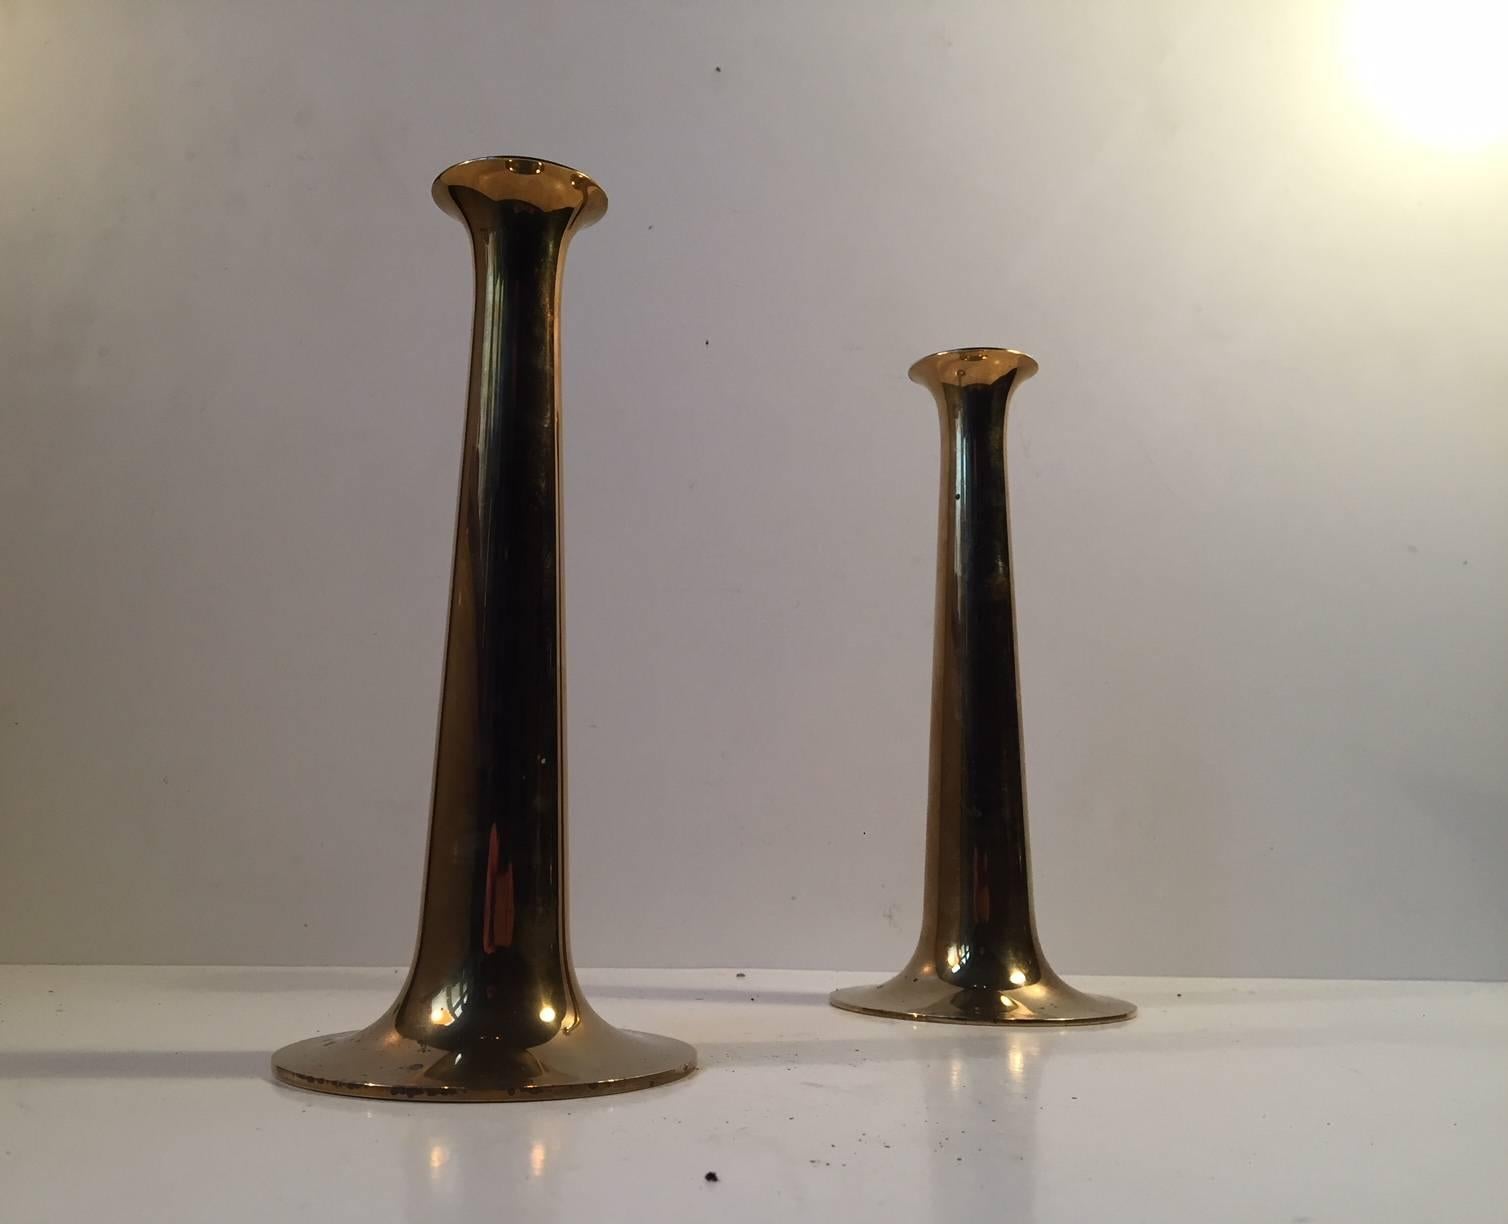 This pair of candlesticks were designed Hans Bolling and manufactured by Torben Ørskov in Denmark during the 1960s. They are made from solid brass and feature the manufacturer's mark to each base. Overall nice and unpolished vintage condition. Only